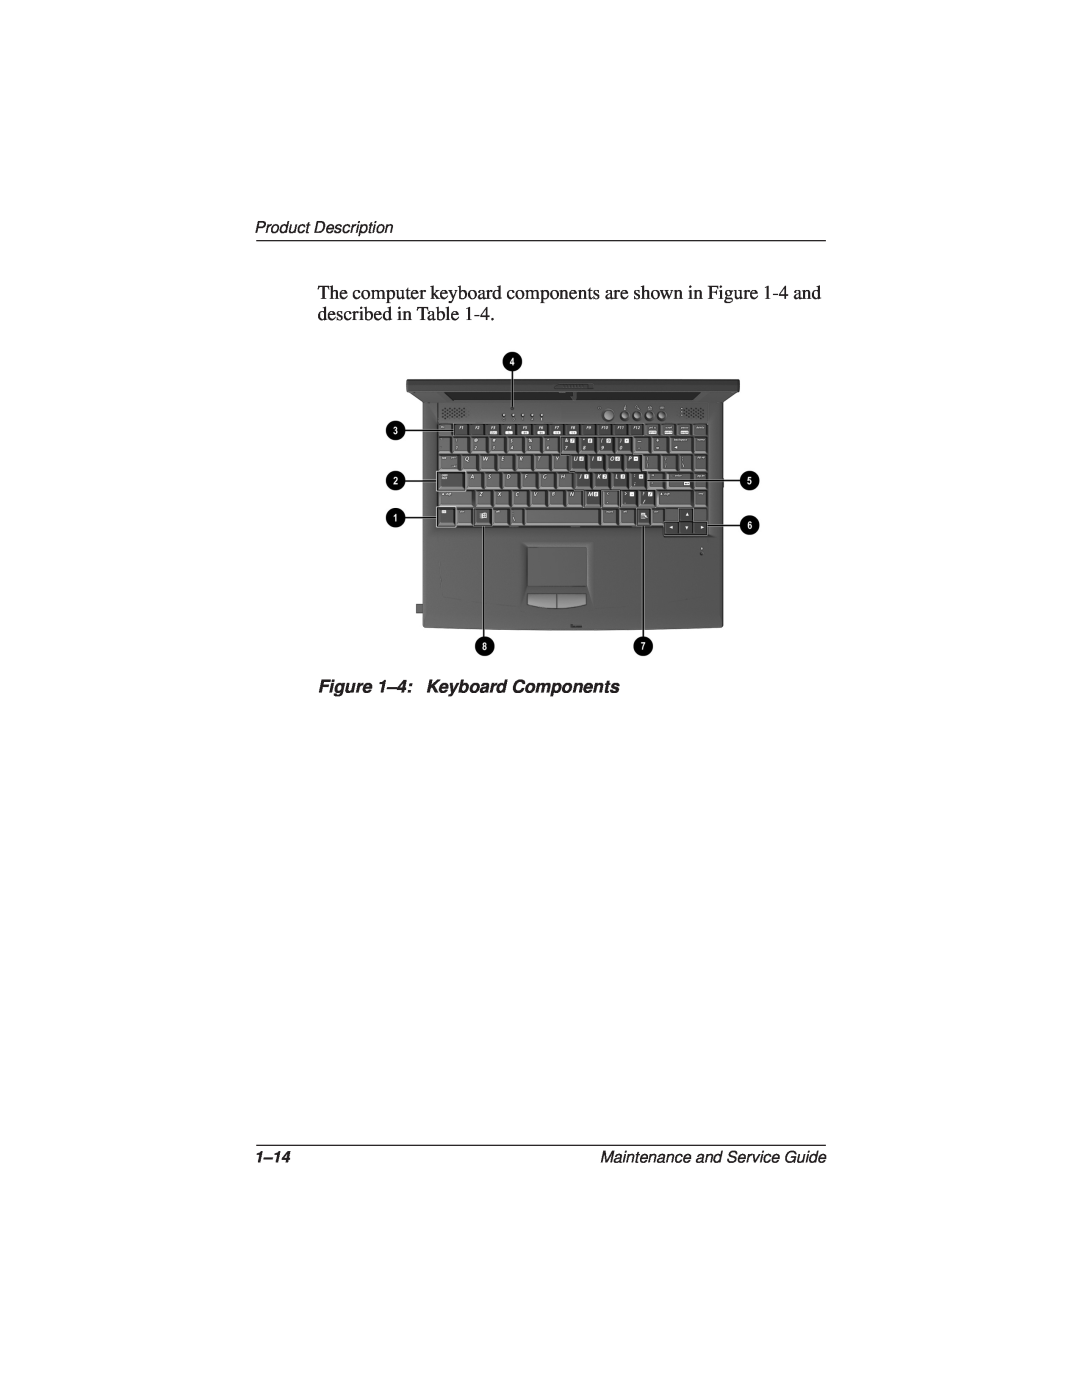 Compaq N110 manual 4 Keyboard Components, Product Description, 1-14, Maintenance and Service Guide 